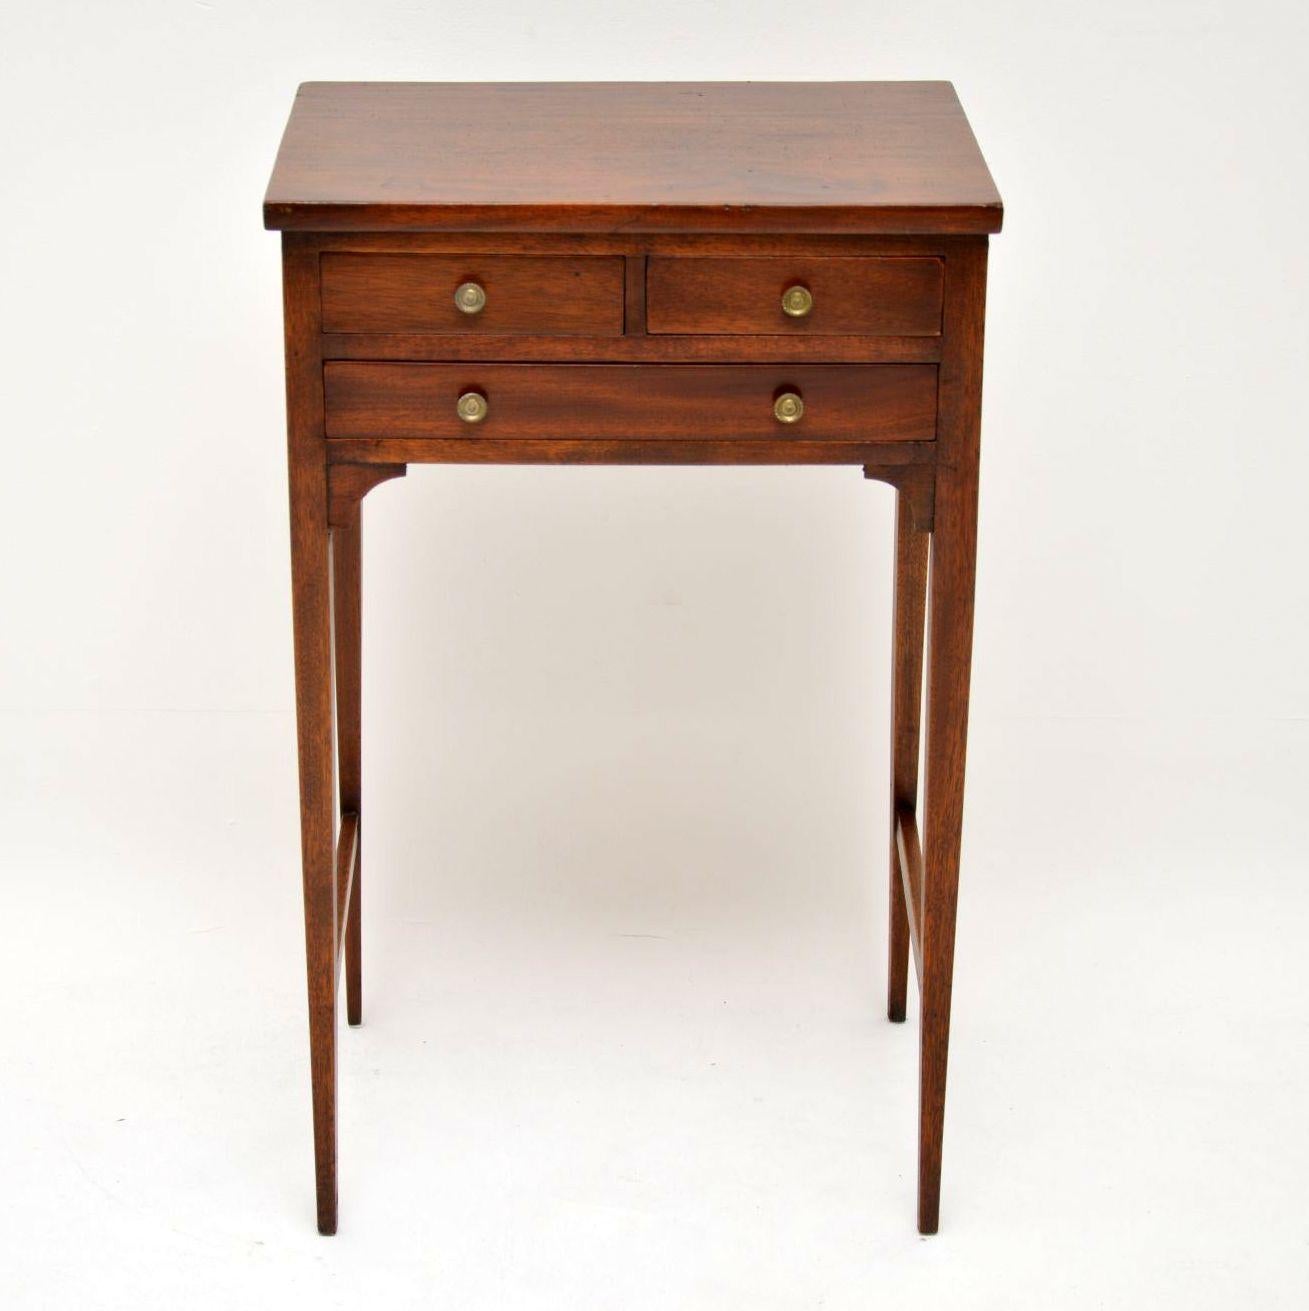 Small elegant George III mahogany side table with three drawers, brass handles and sitting on tapered legs with cross stretchers. It’s in good condition, with no splits or warps and I would date it to circa 1790s period.

Measures: Width – 18